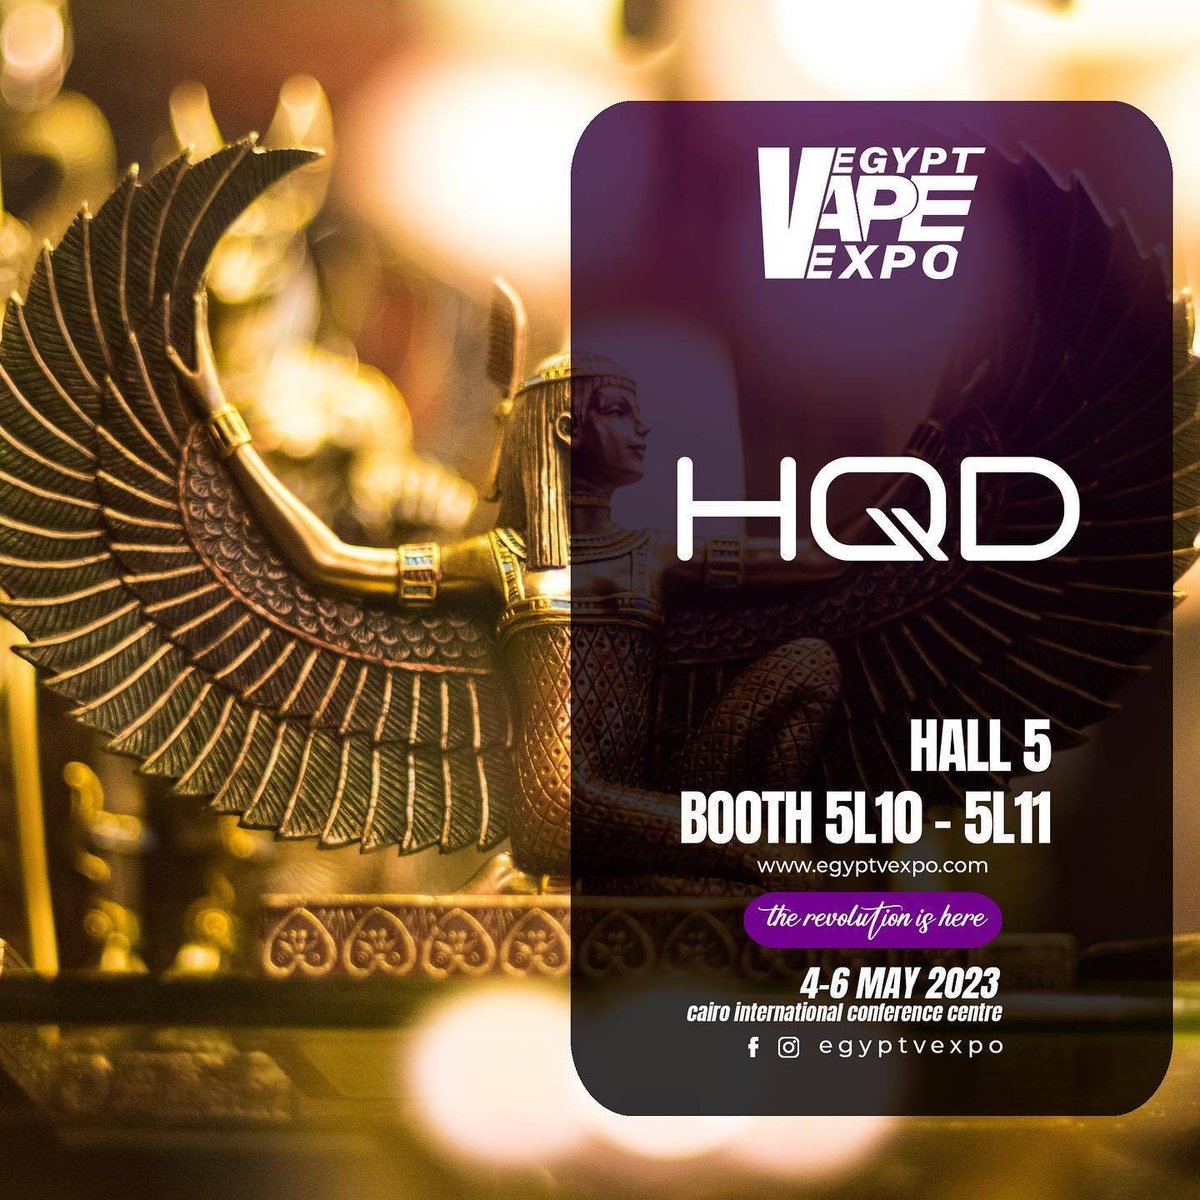 Egypt Vape Expo HQD Hall 5 Booth 5L10-5L11 May 4th- 6th Cairo International Conference Centre Welcome your visit wa.me/8619168590359 #汉清达#hqd #ecig #vapeexpo #egype #cairo #hall #vapeevent #party #conference #disposablevape #youth #nosmoking #vaping #vapecommunity